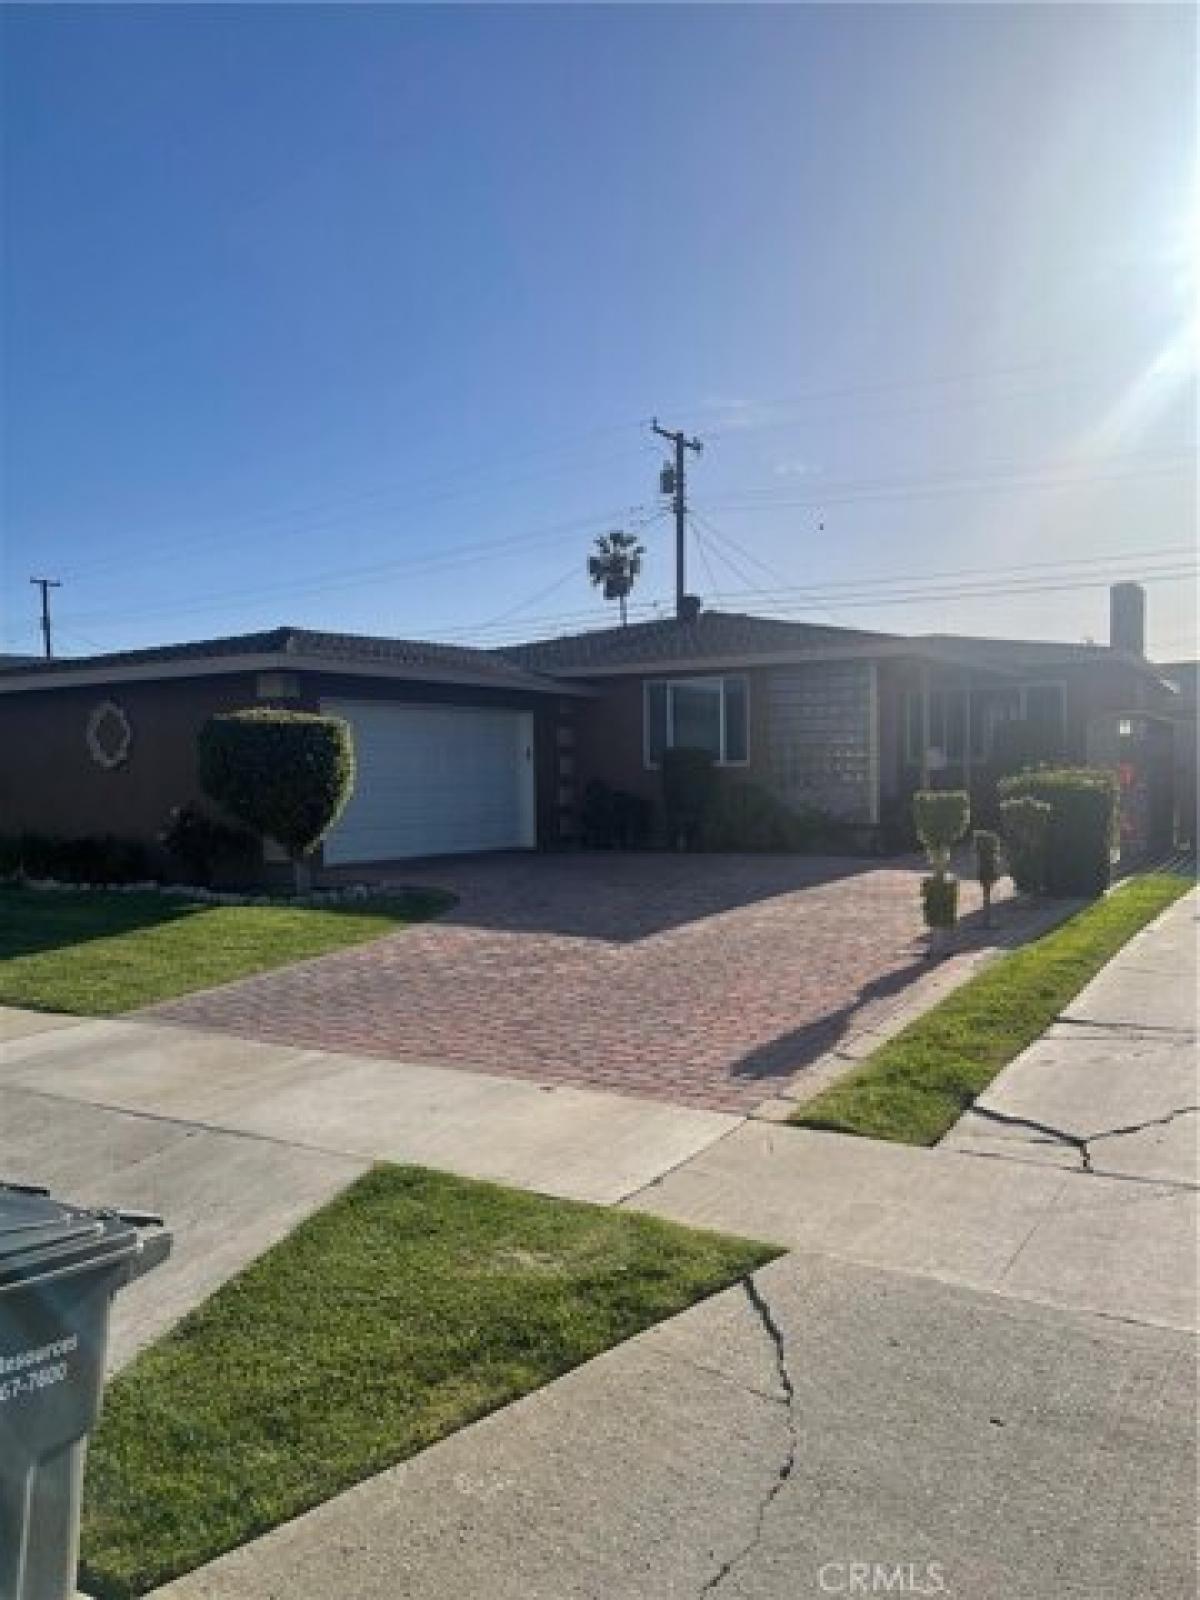 Picture of Home For Sale in Gardena, California, United States